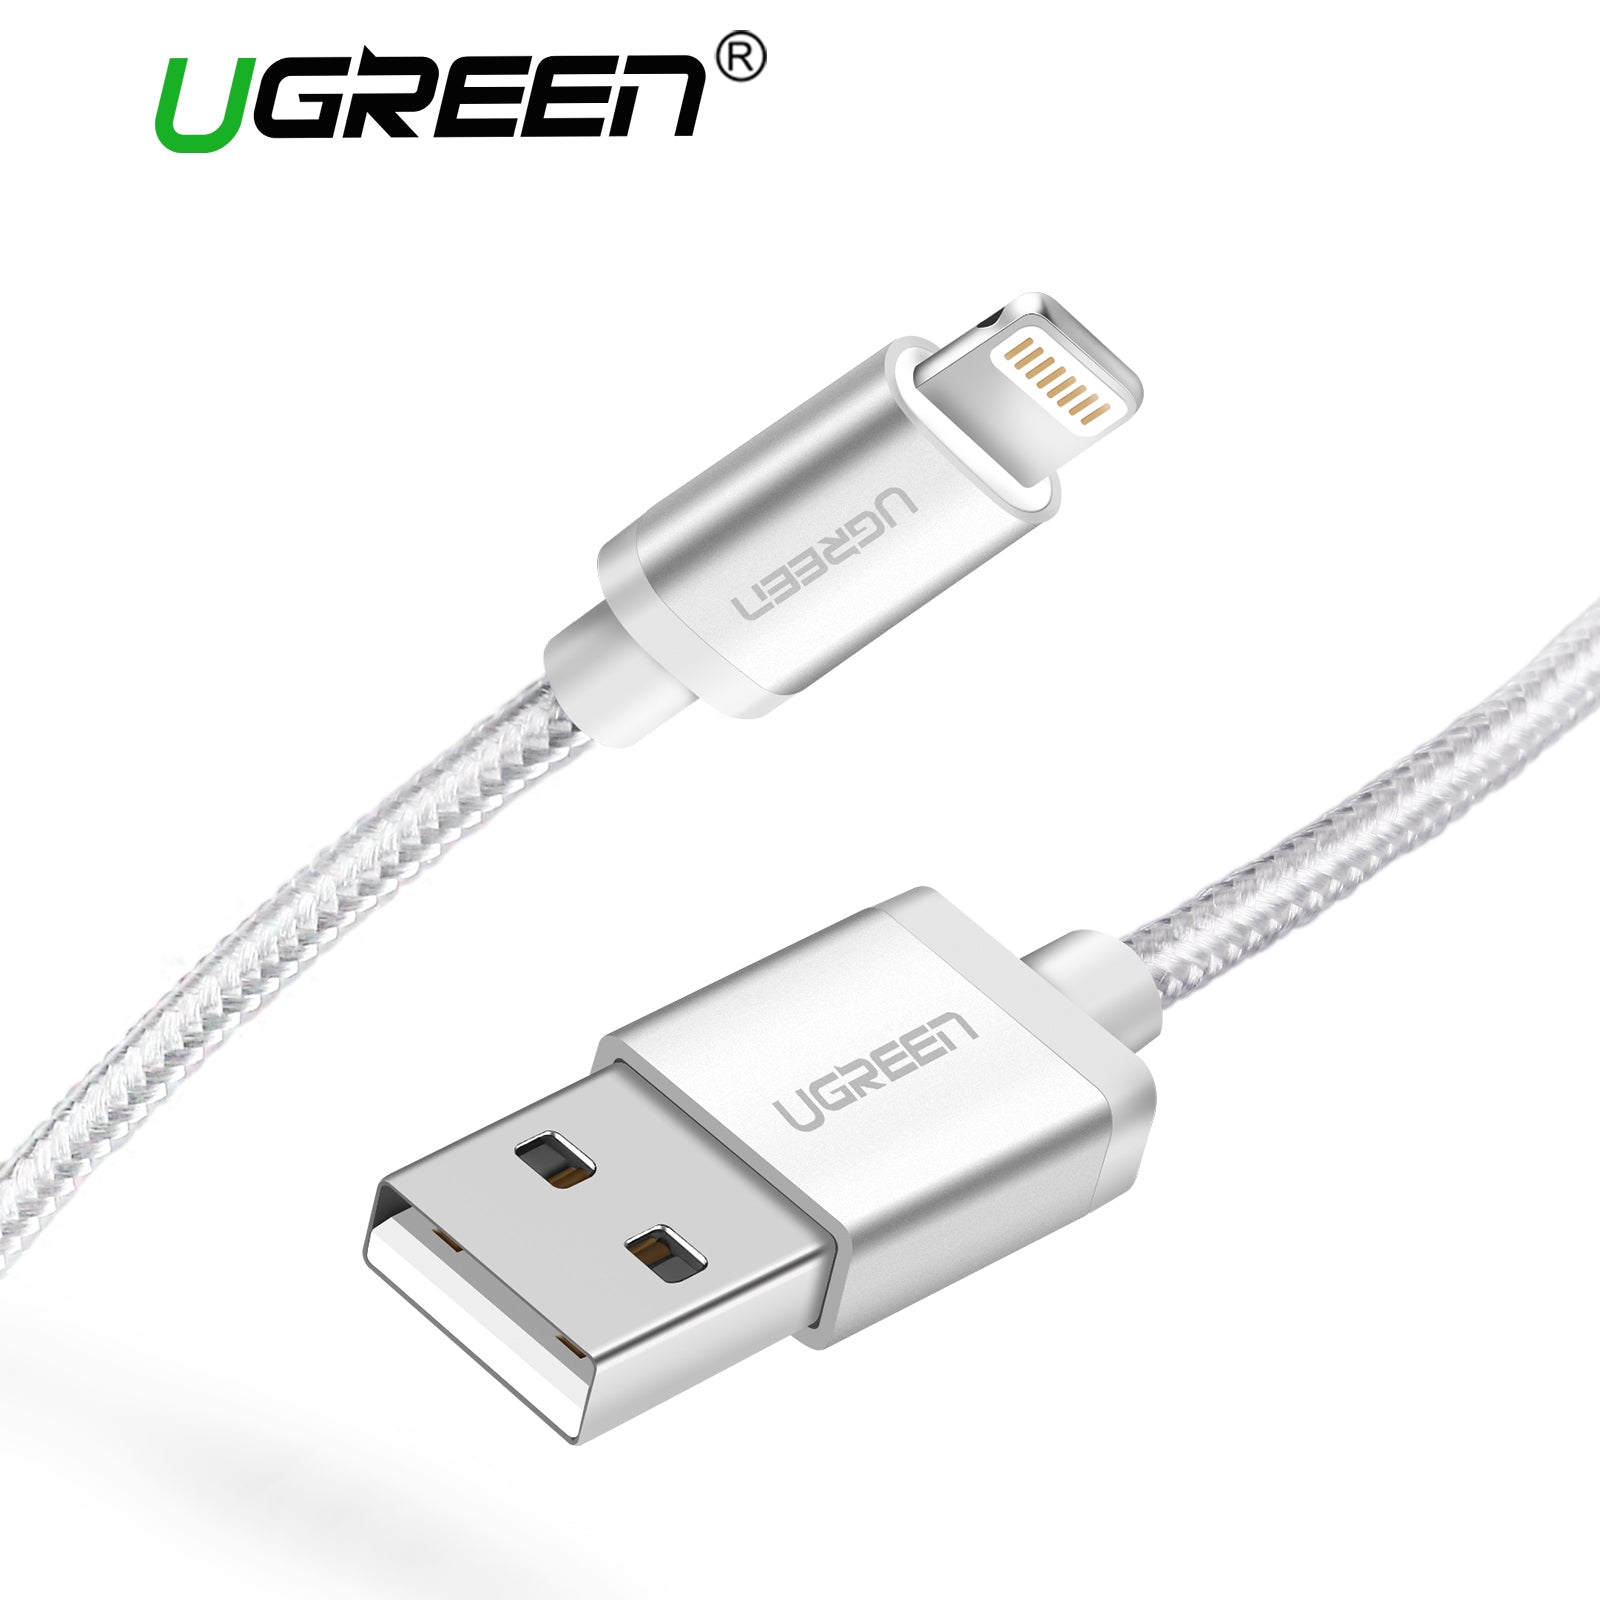 Nylon Braid Anti Cut MFI Certified Lightning Cable By Ugreen Silver